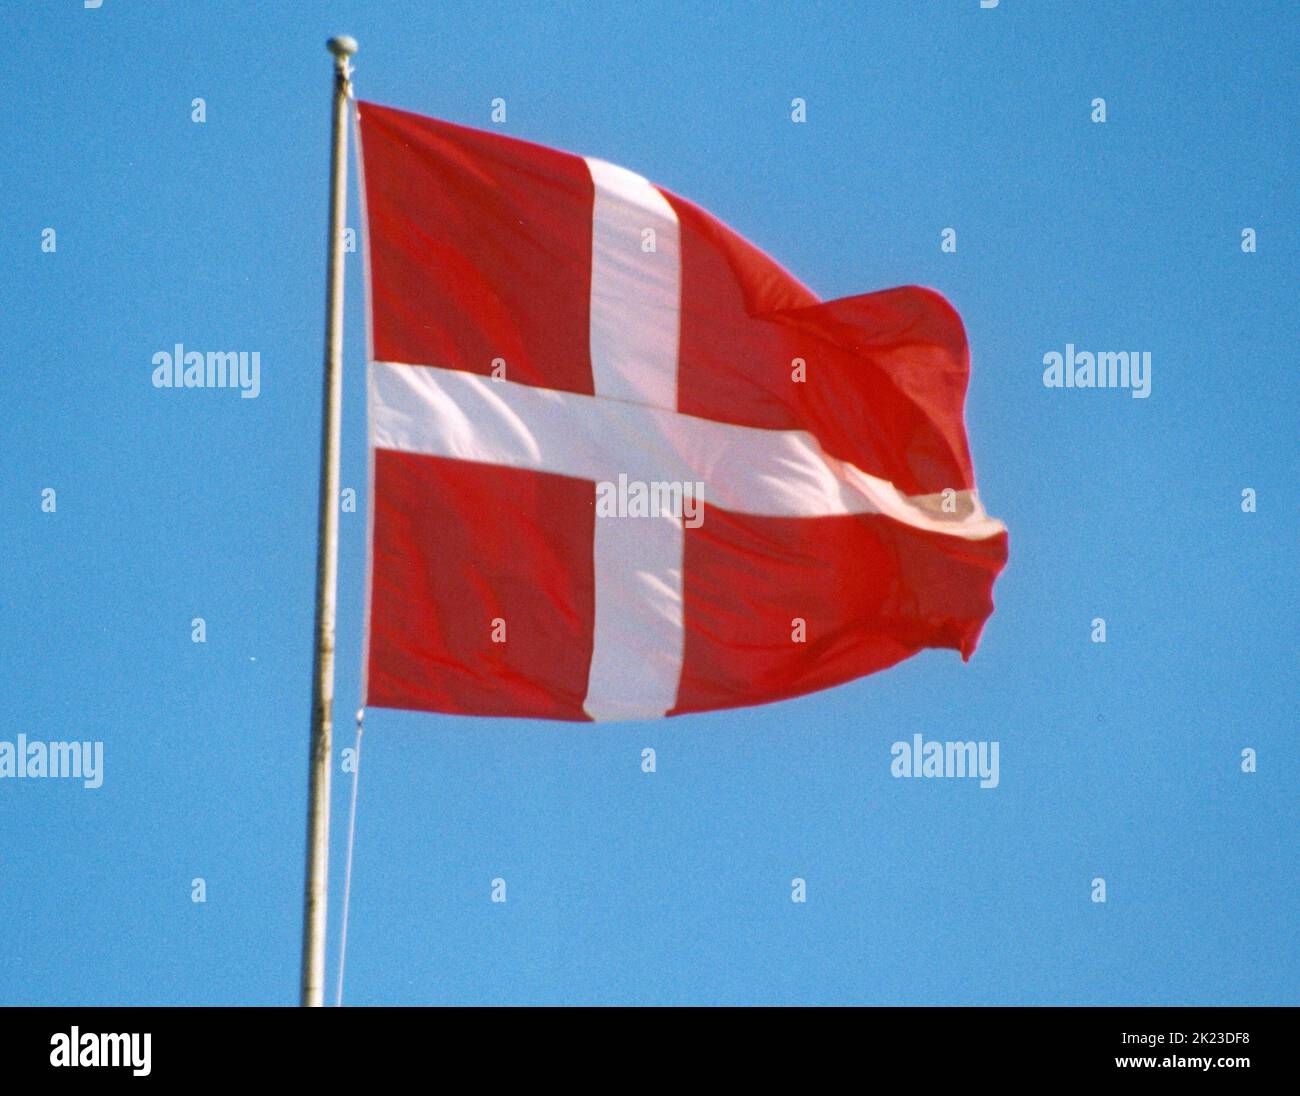 DENMARK flag with its white cross on a red background Stock Photo